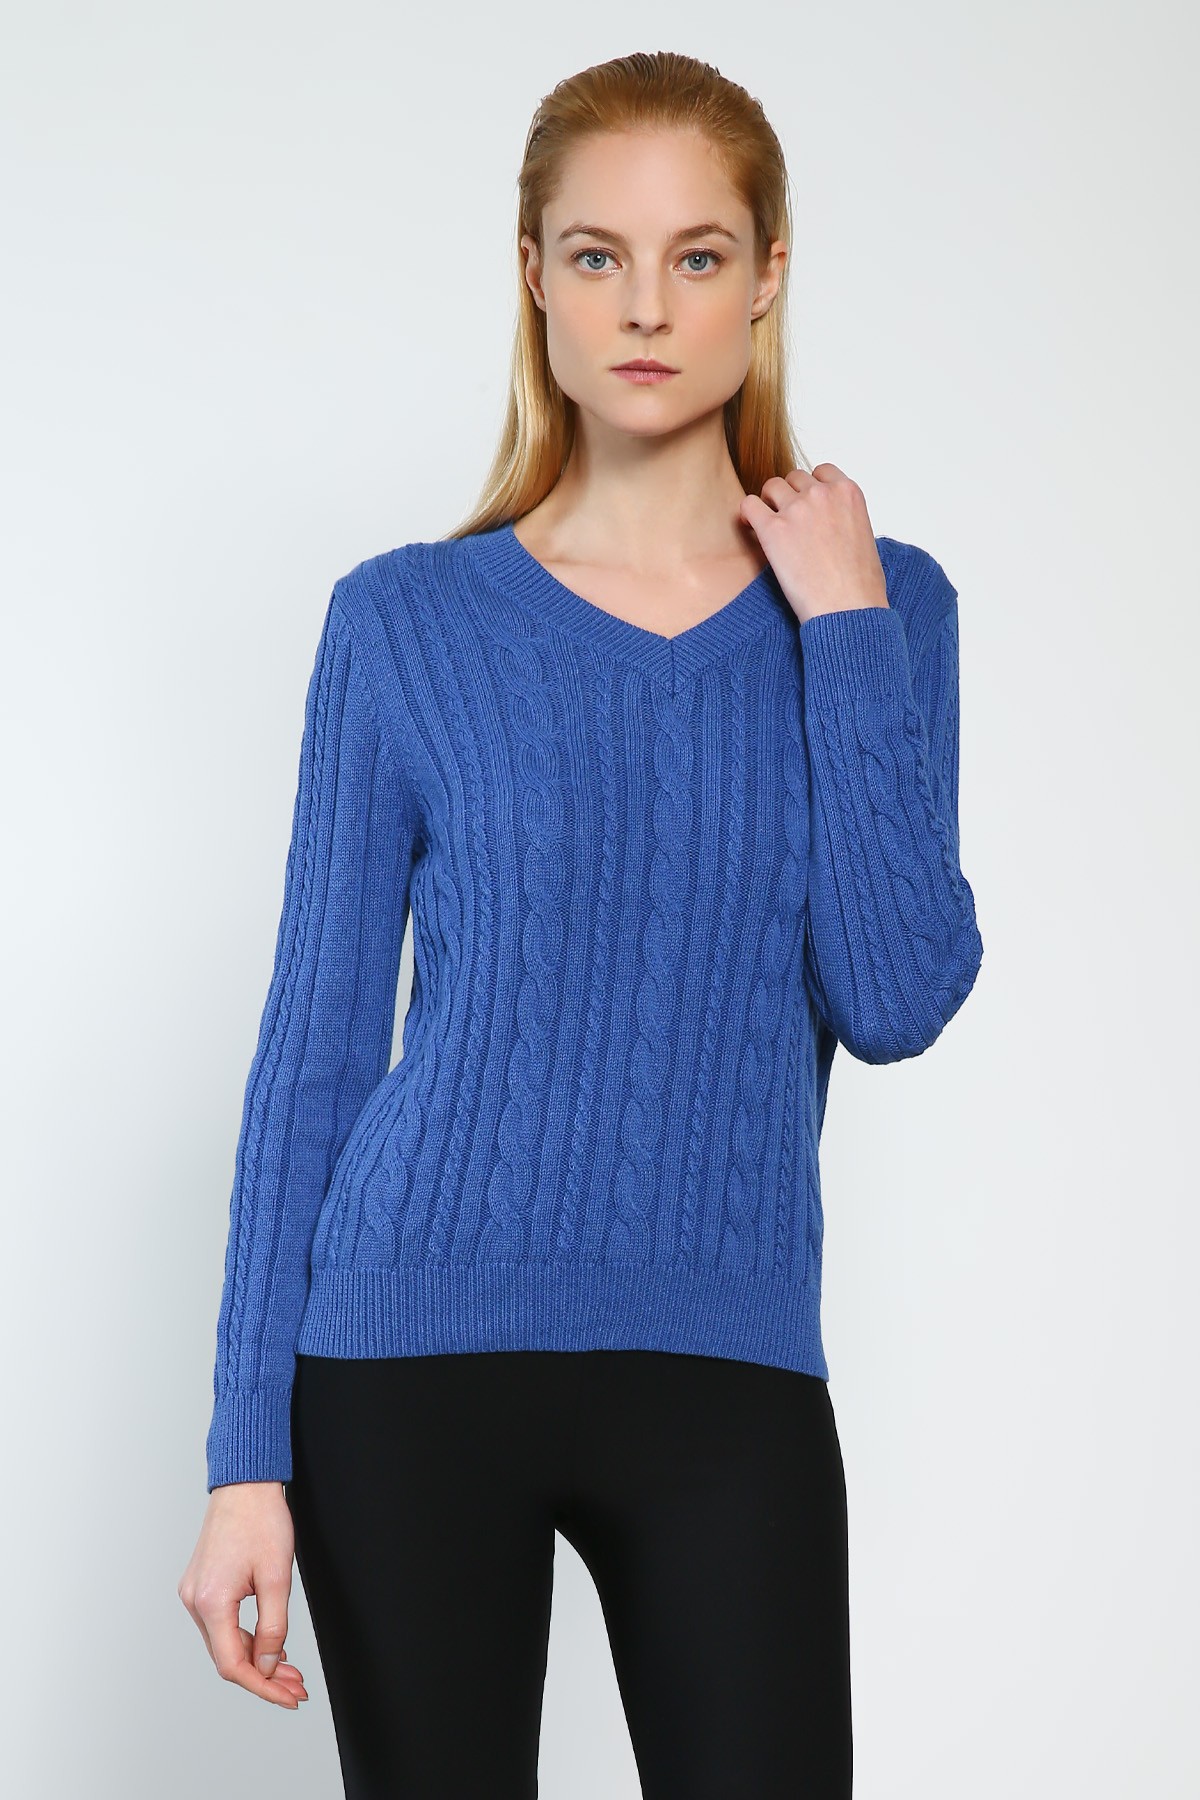 Classic Ladies V-neck Knitted Top 100% Cotton